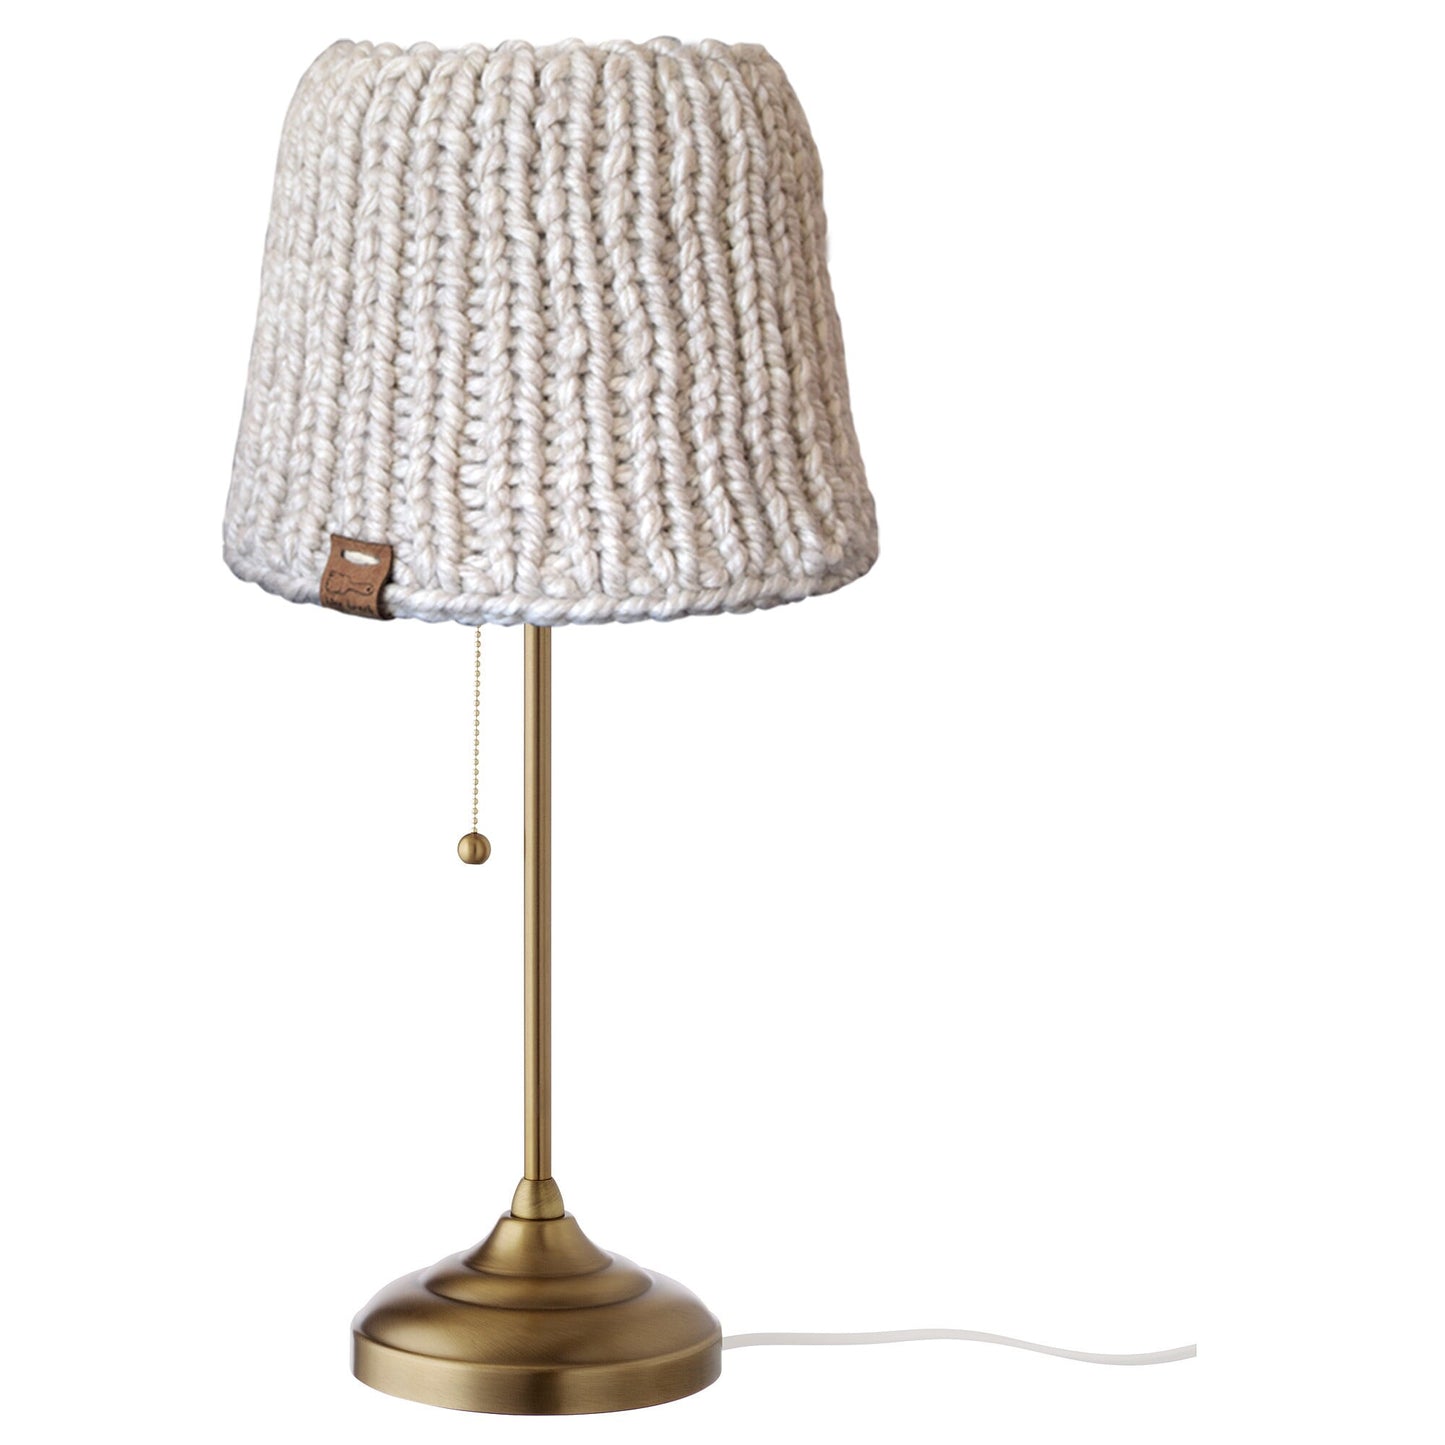 Woolen lampshade, Scandinavian style, Handmade,  Knitted Lampshade , interesting unique lampshade, home decoration, Ceiling or Table Lamp